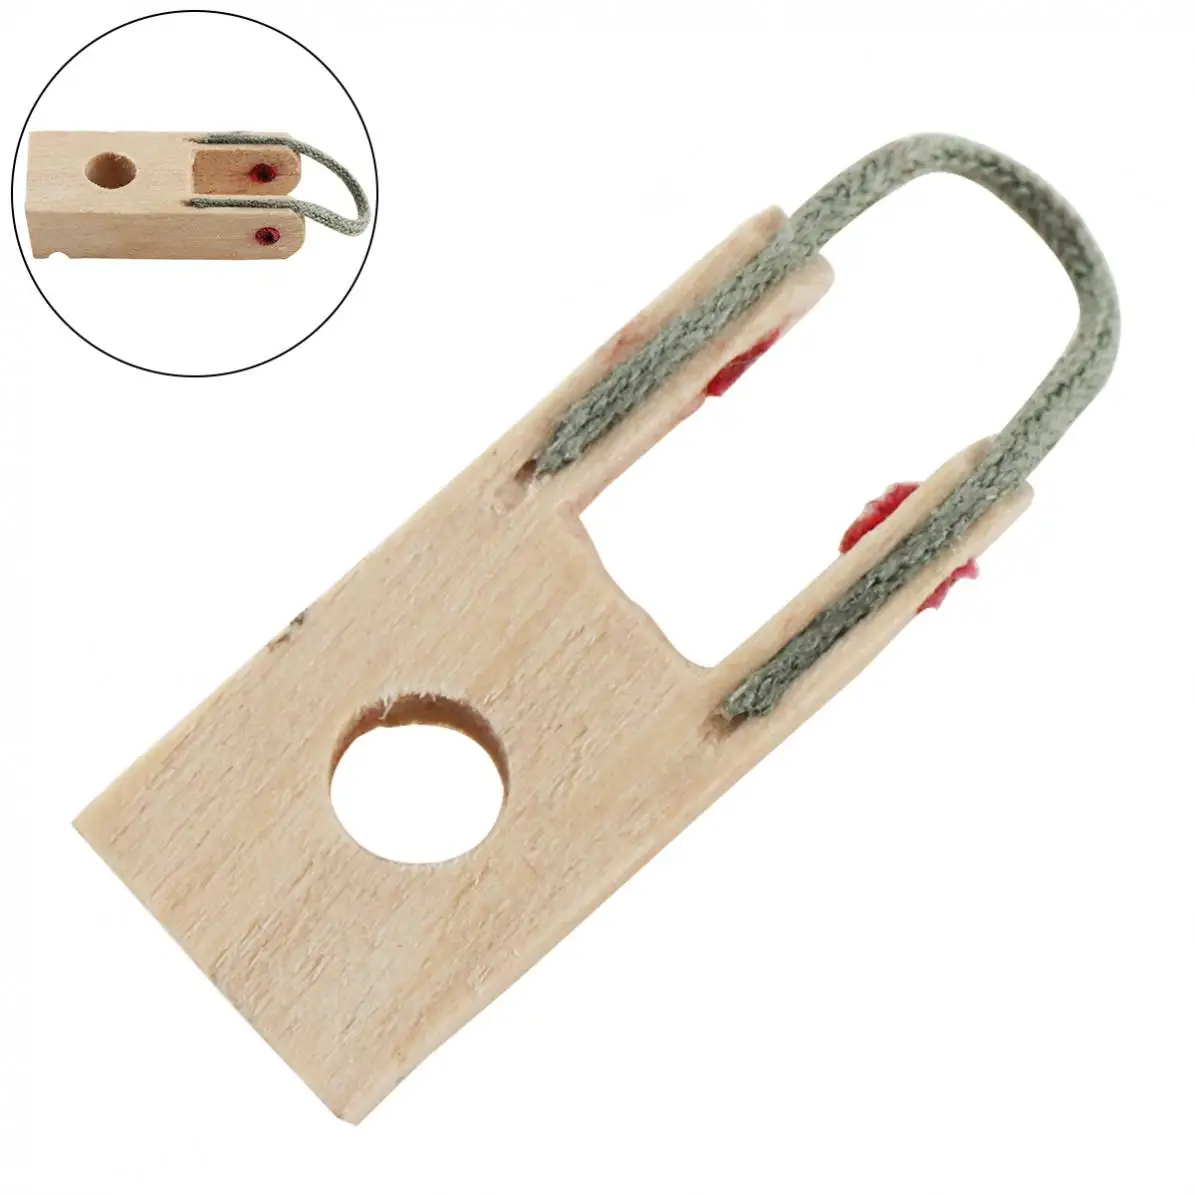 

Keyboard Instruments Wooden Piano Damper Flange Piano Repair Part with Rope for Upright Pianos